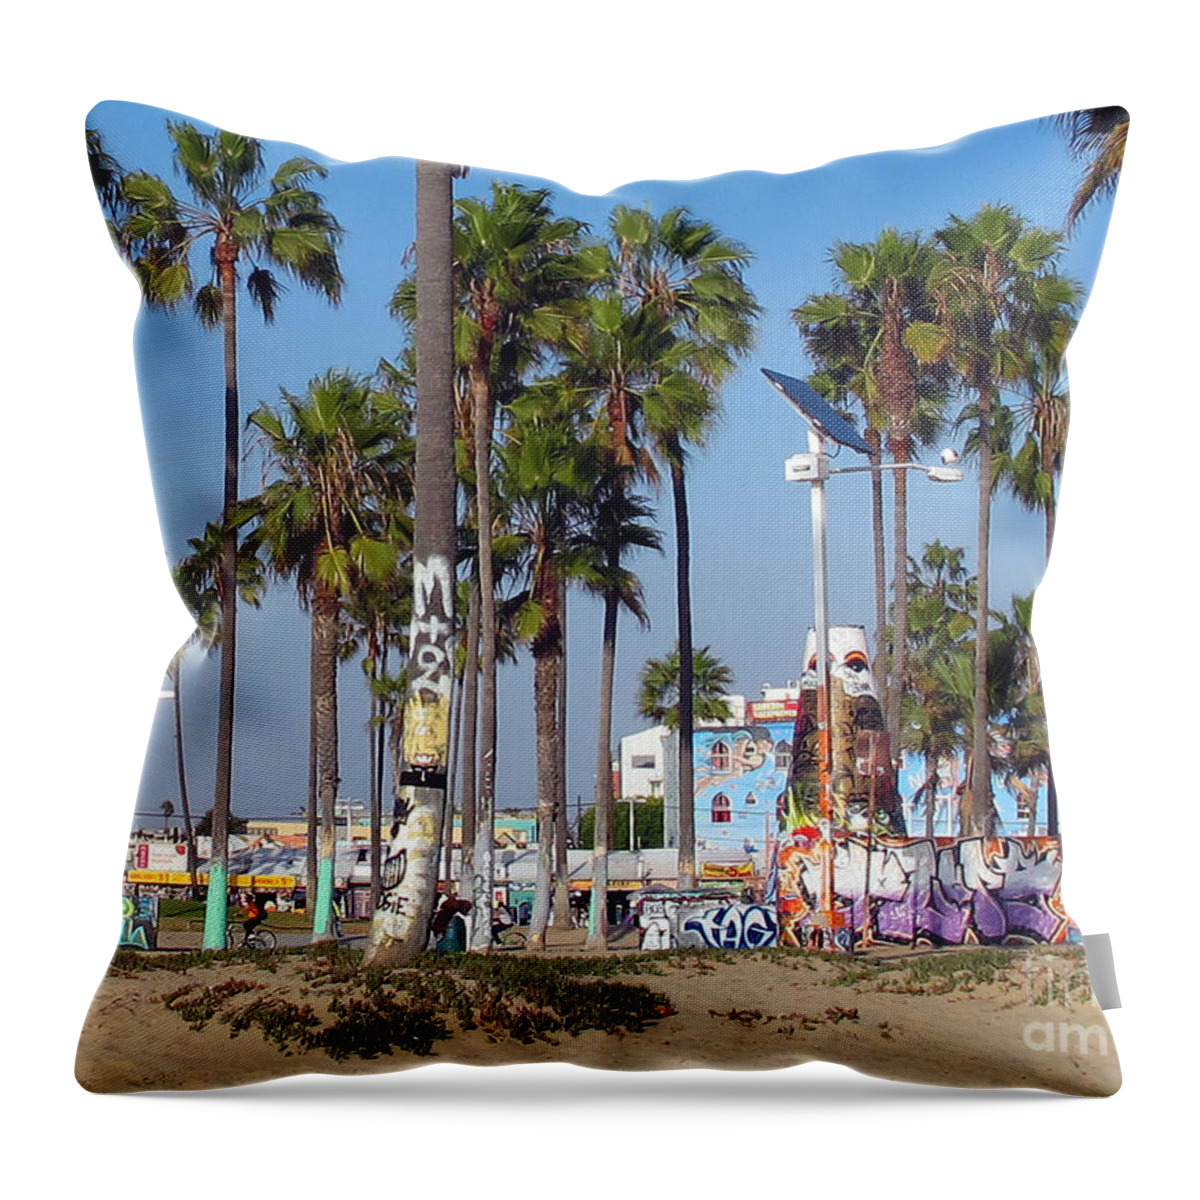 Graffiti Throw Pillow featuring the photograph Art Of Venice Beach by Kelly Holm